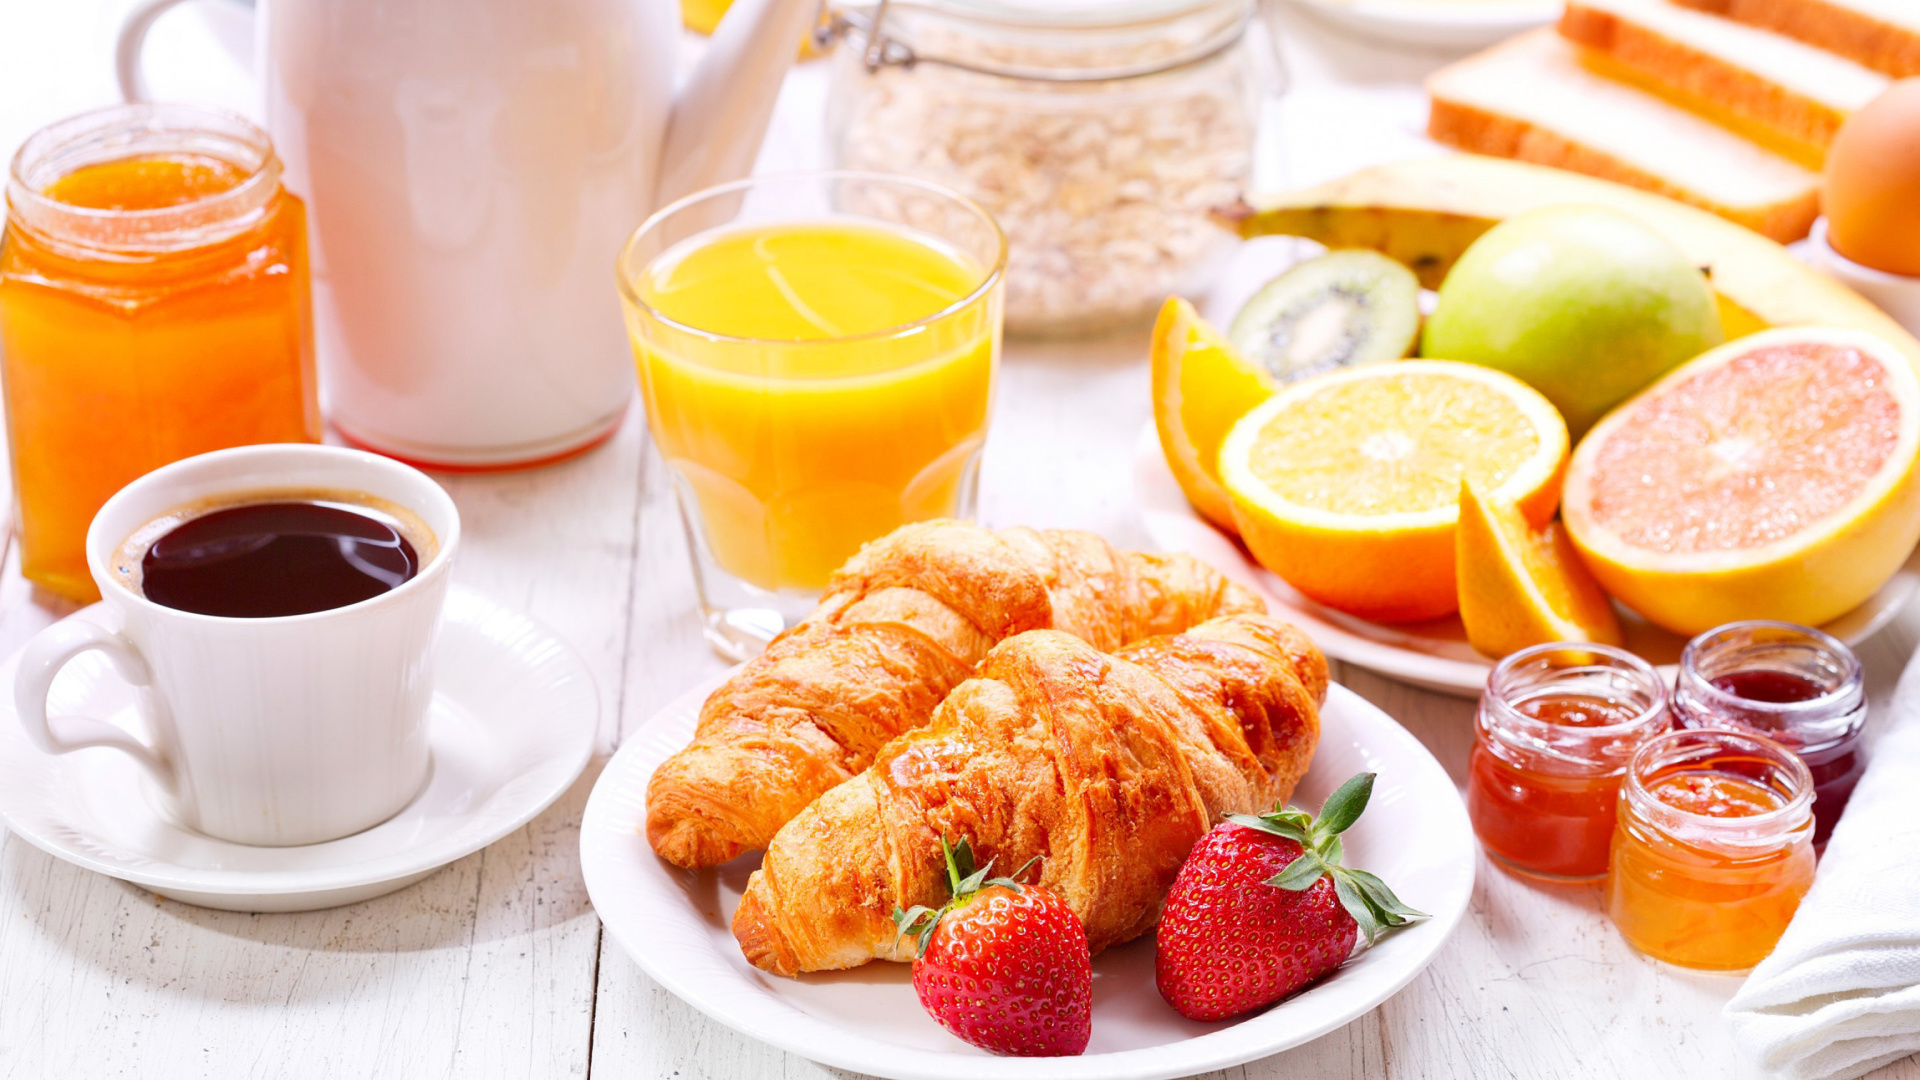 Breakfast with croissants and fruit screenshot #1 1920x1080